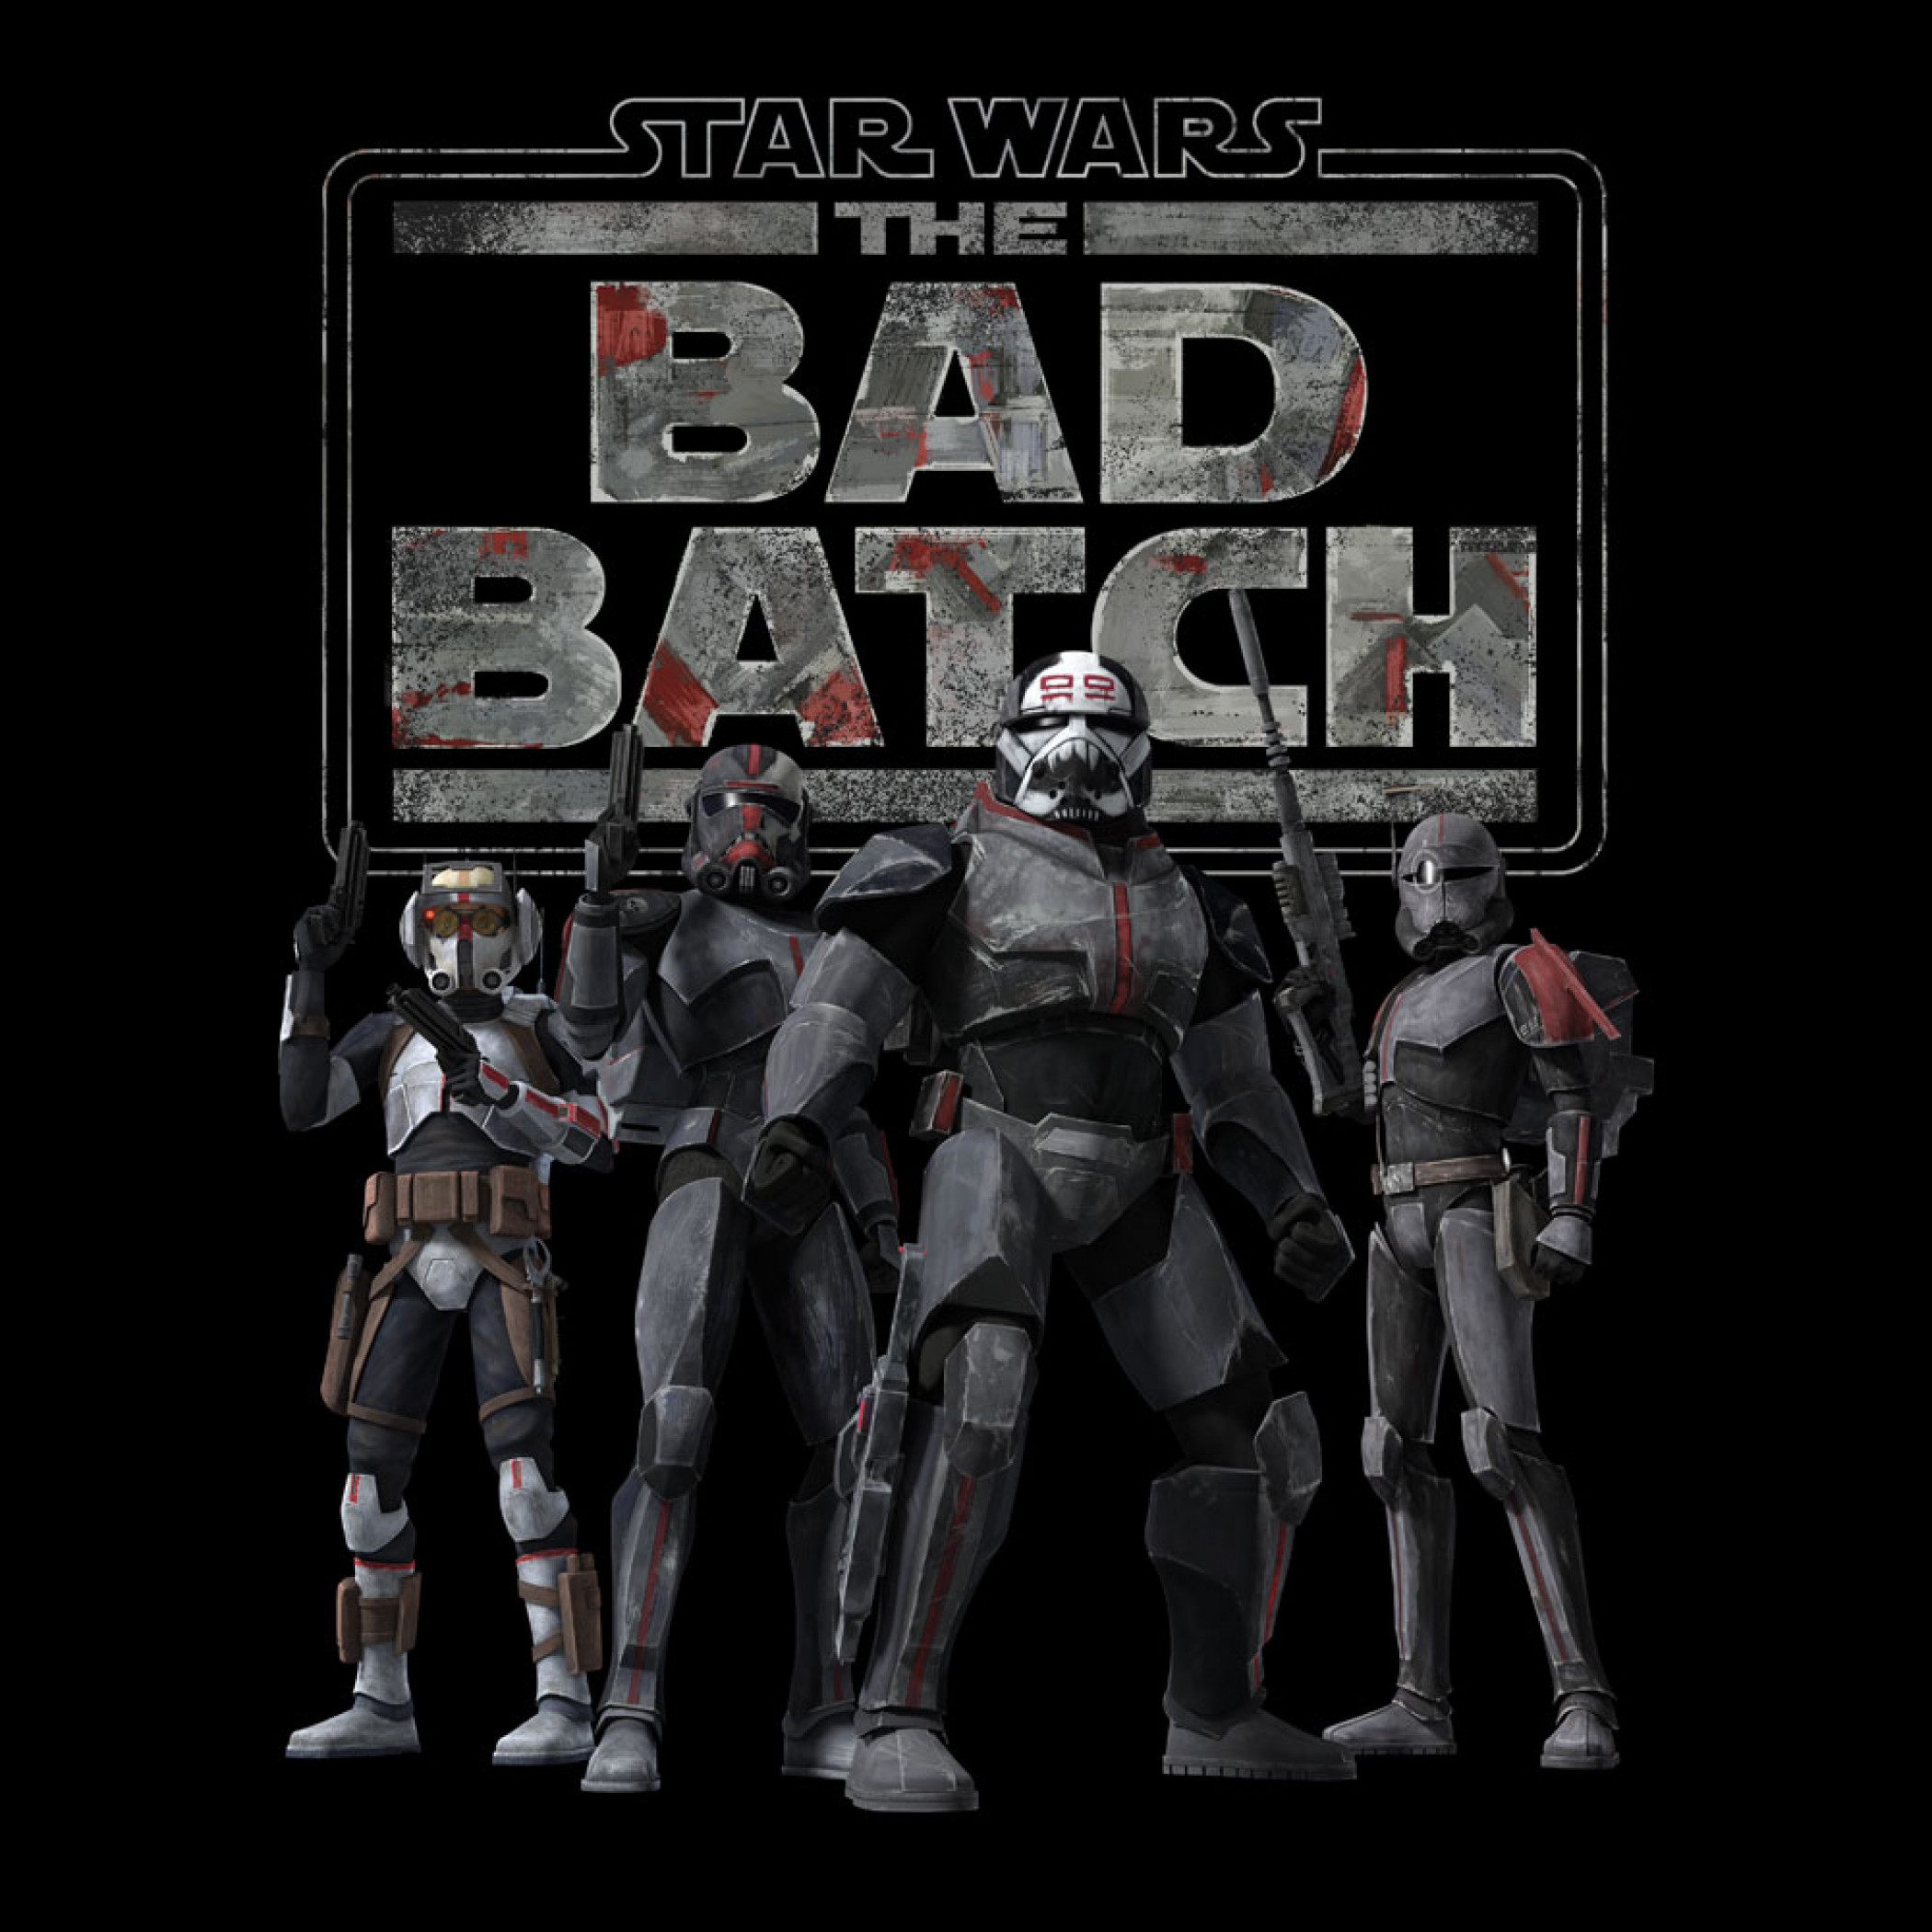 Star Wars The Clone Wars The Bad Batch Line Up with Logo T-Shirt